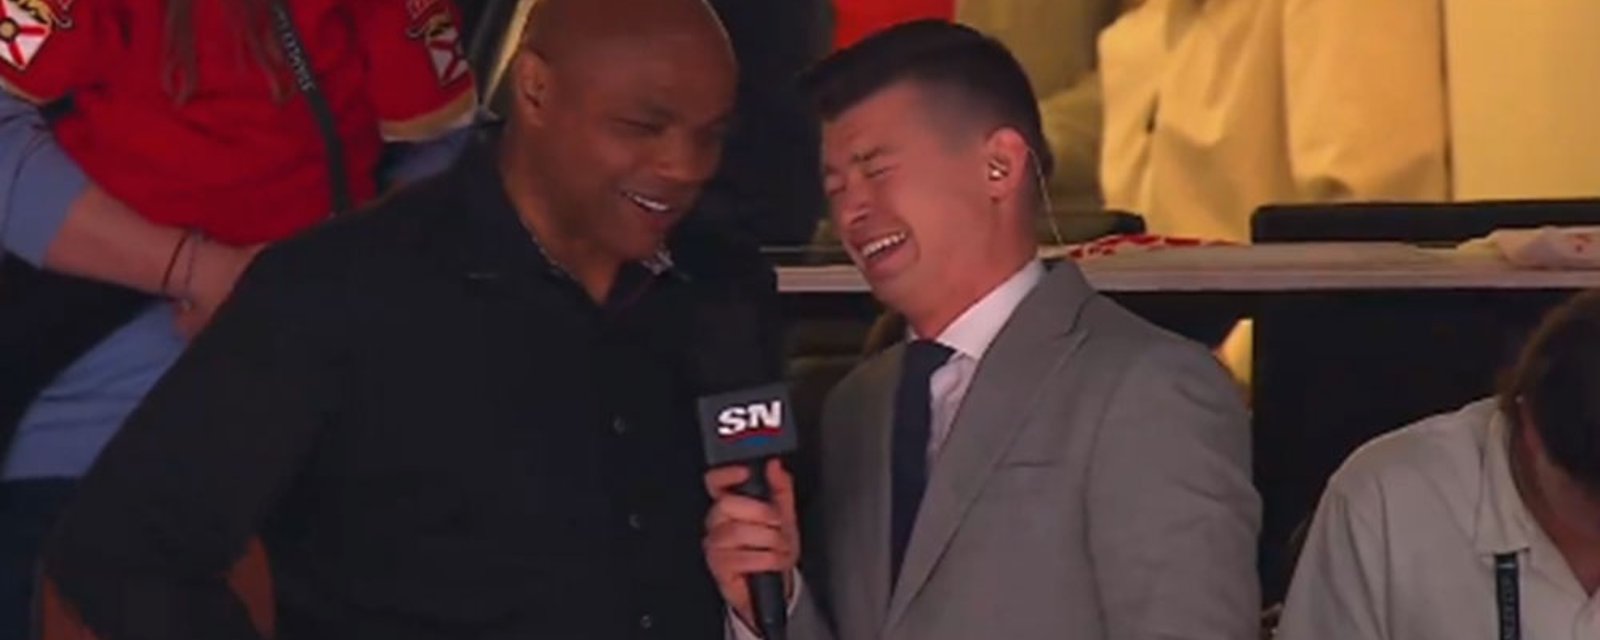 A possibly inebriated Charles Barkley drops an 'F' bomb on live TV!